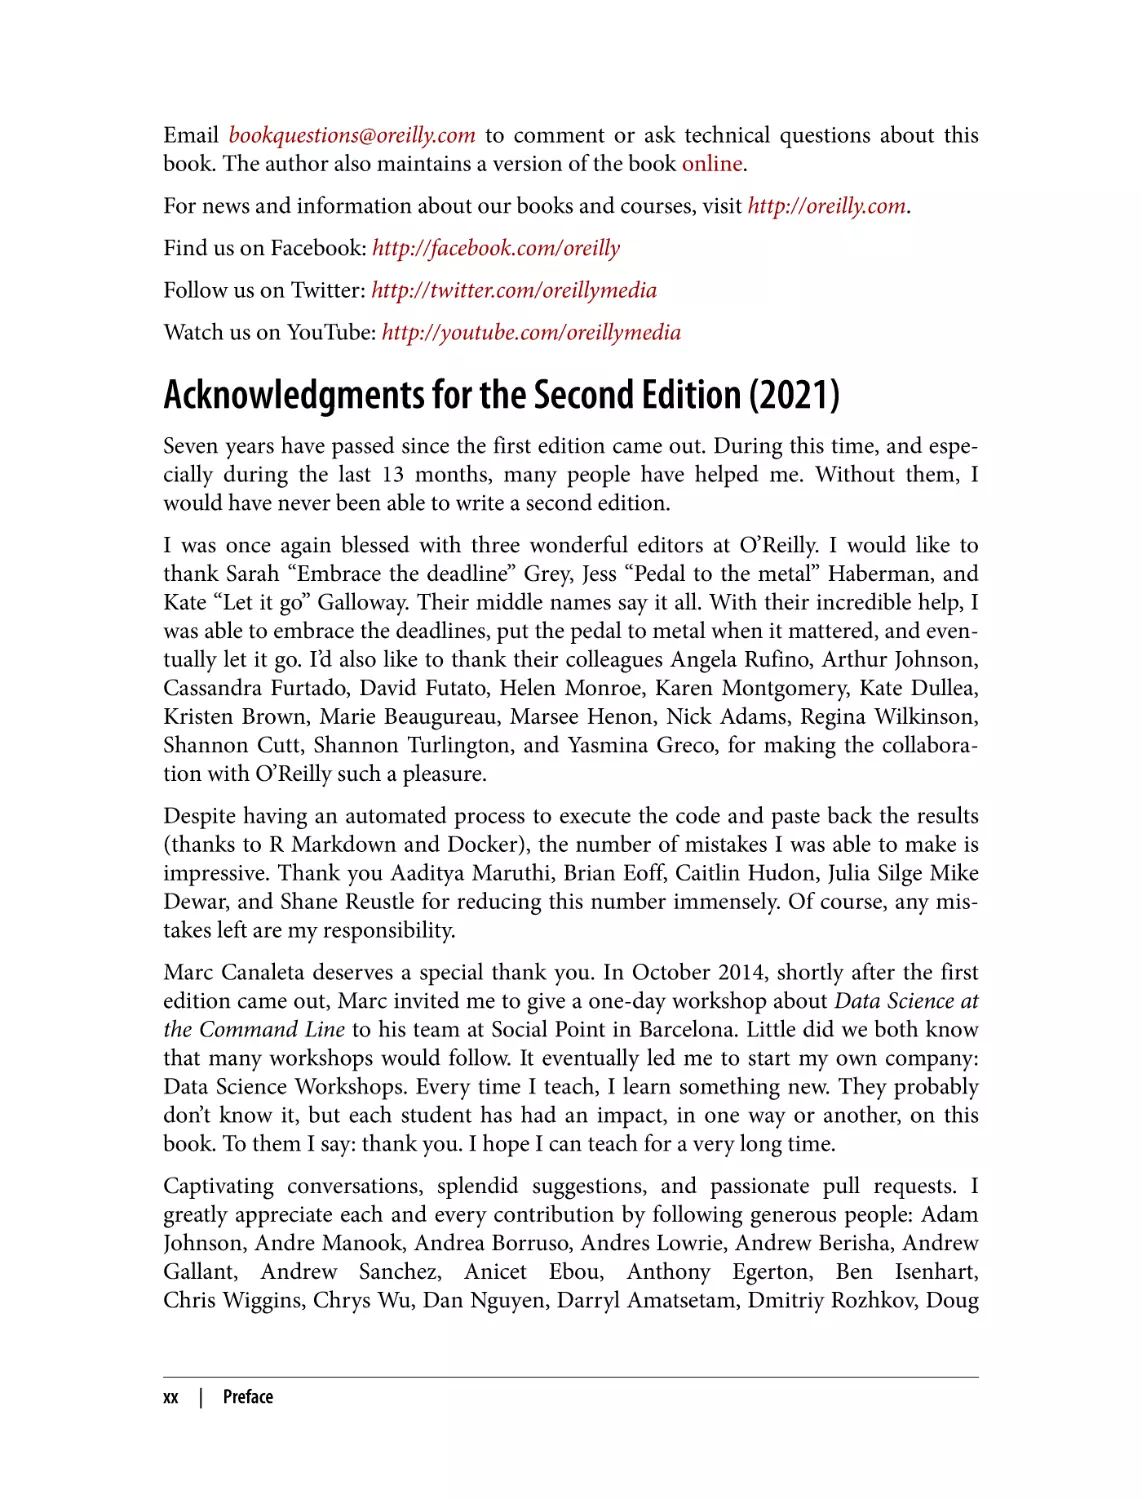 Acknowledgments for the Second Edition (2021)